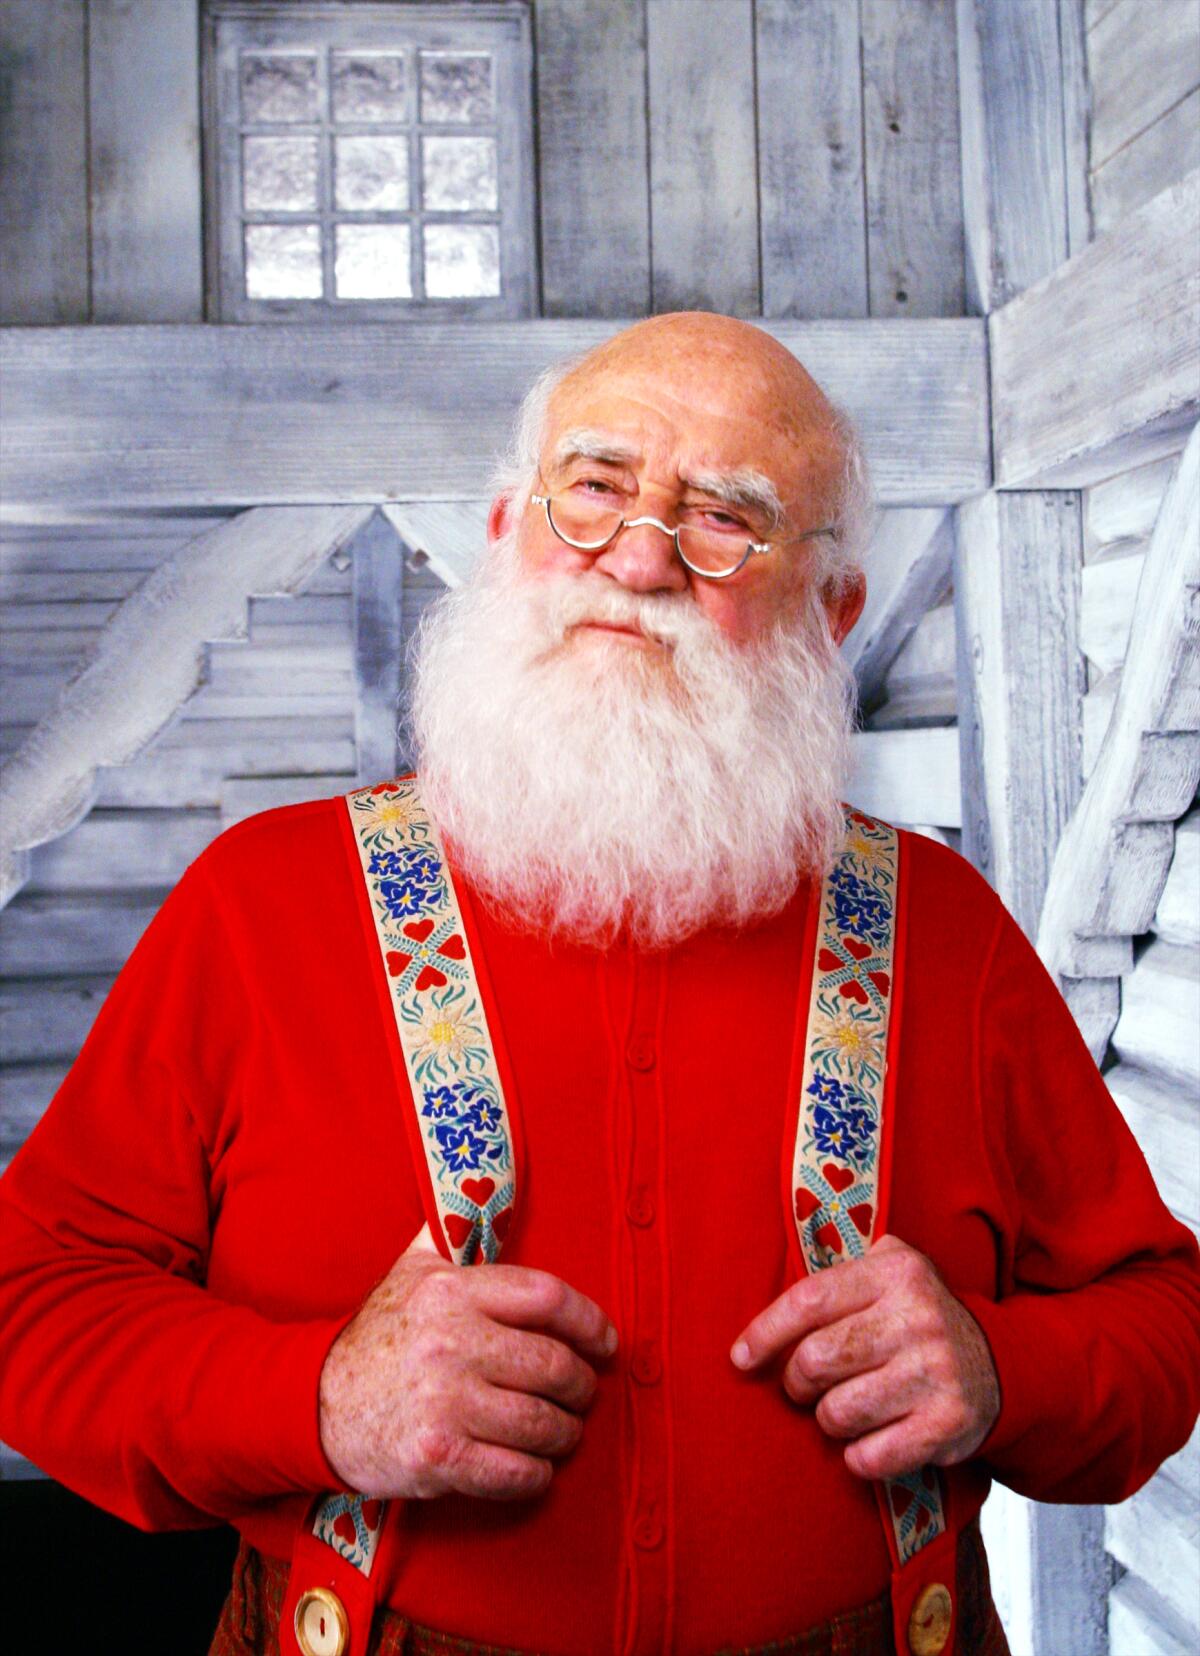 A man dressed as Santa Claus in a red shirt and colorful suspenders